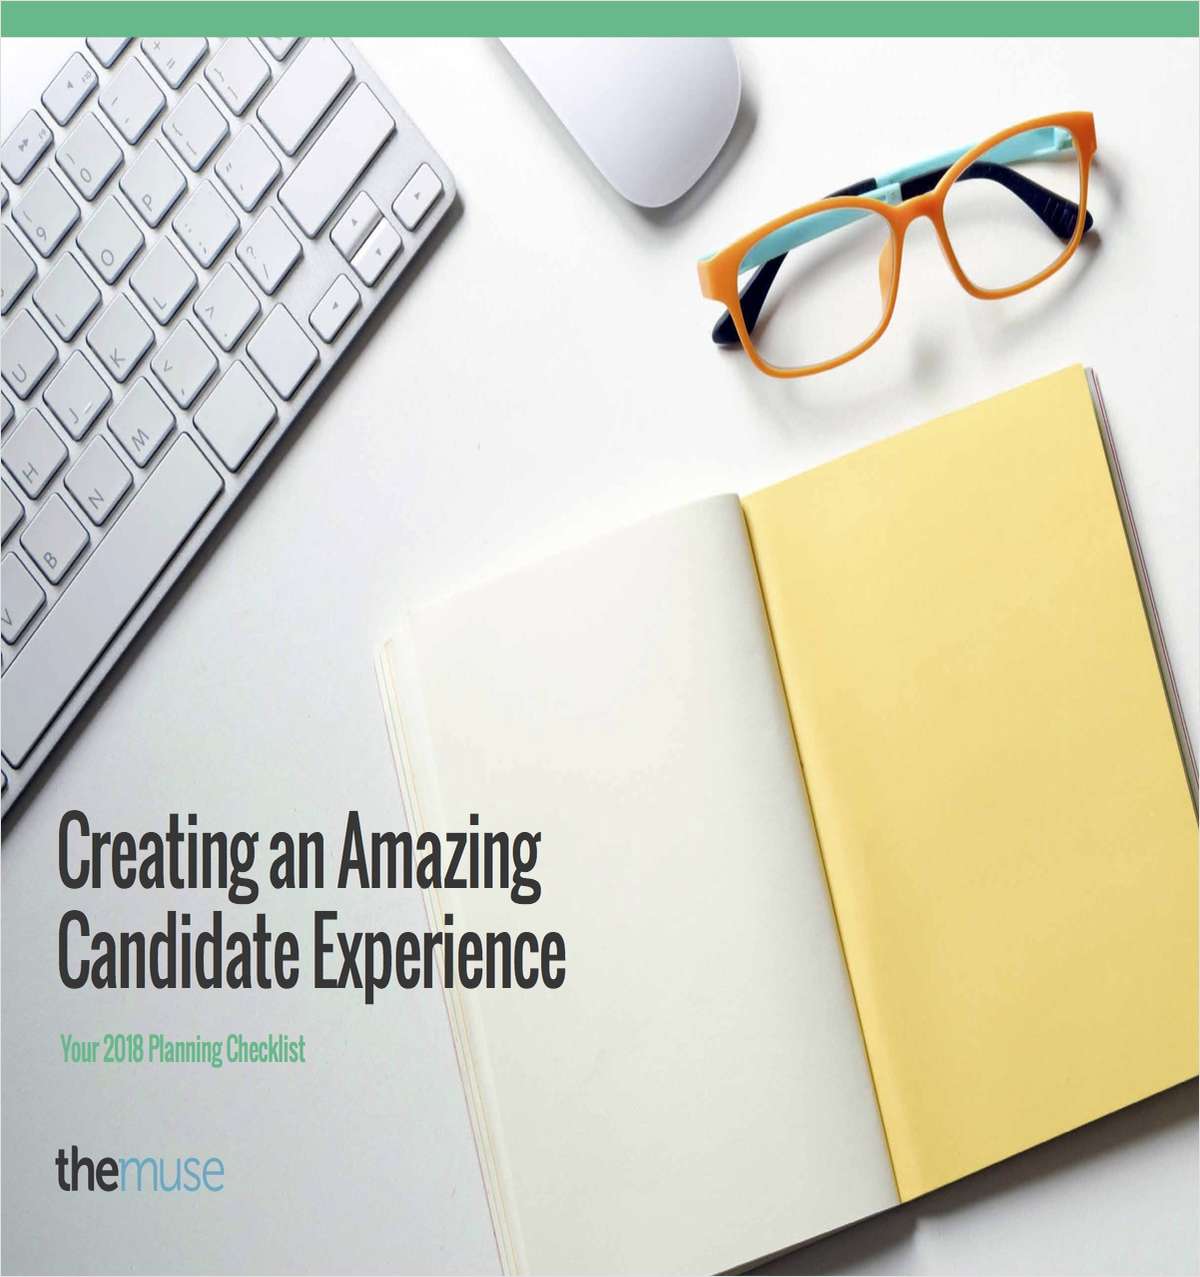 Creating an Amazing Candidate Experience Checklist